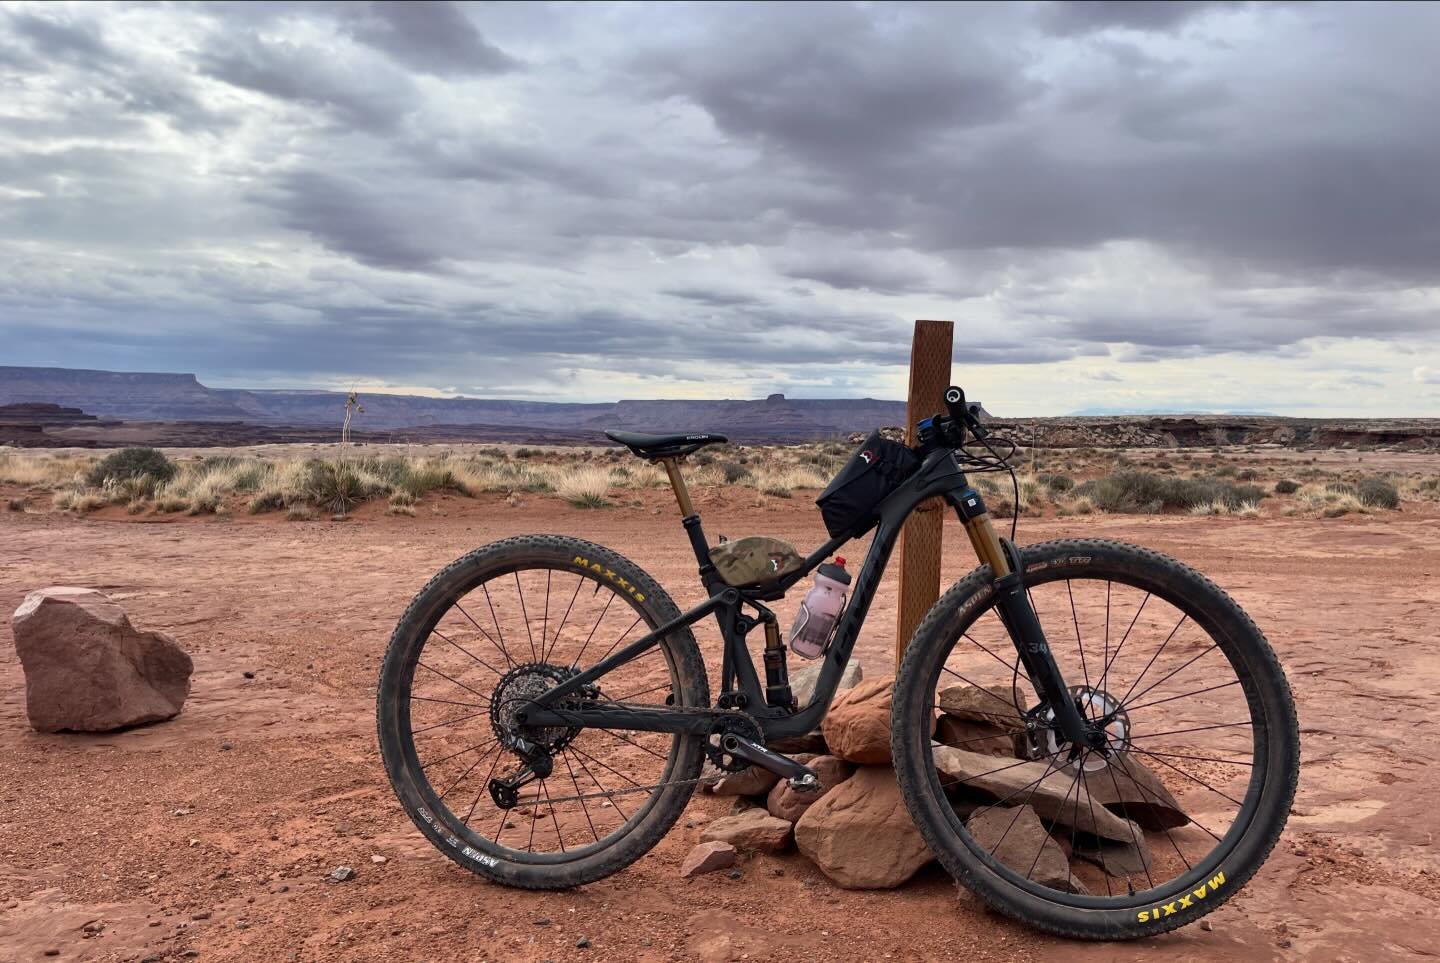 After 6-months of secretly riding around the fastest hubs (on dirt), putting them through long days of bikepacking in Baja and southern Arizona (with AZT), countless winter training miles, and floating around White Rim trail twice, I'm excited to sha